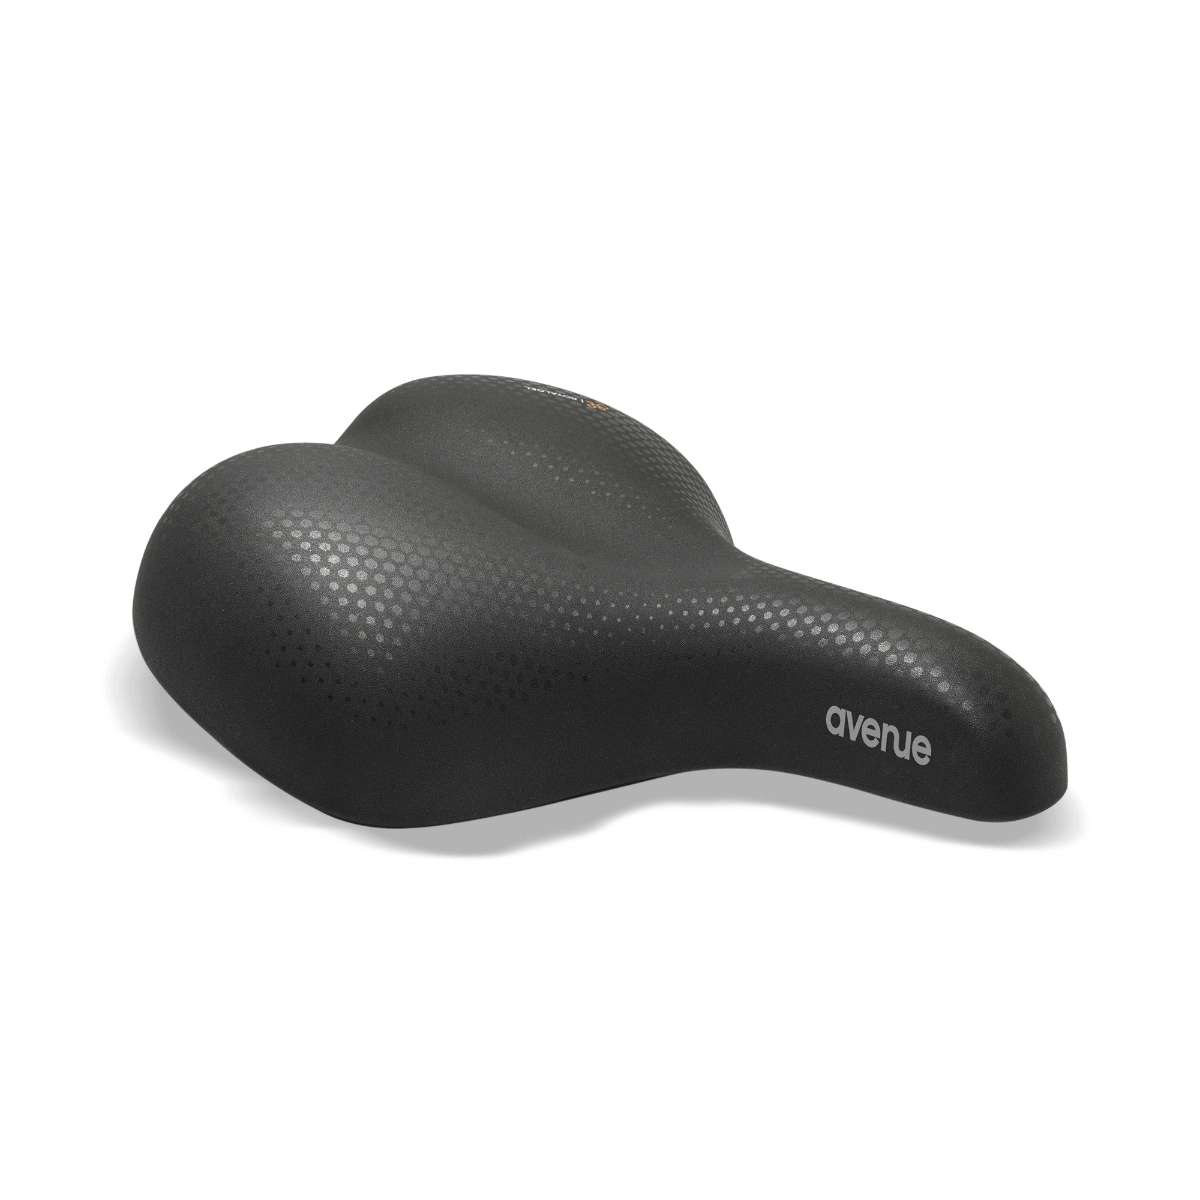 Avenue Relaxed - Selle Royal